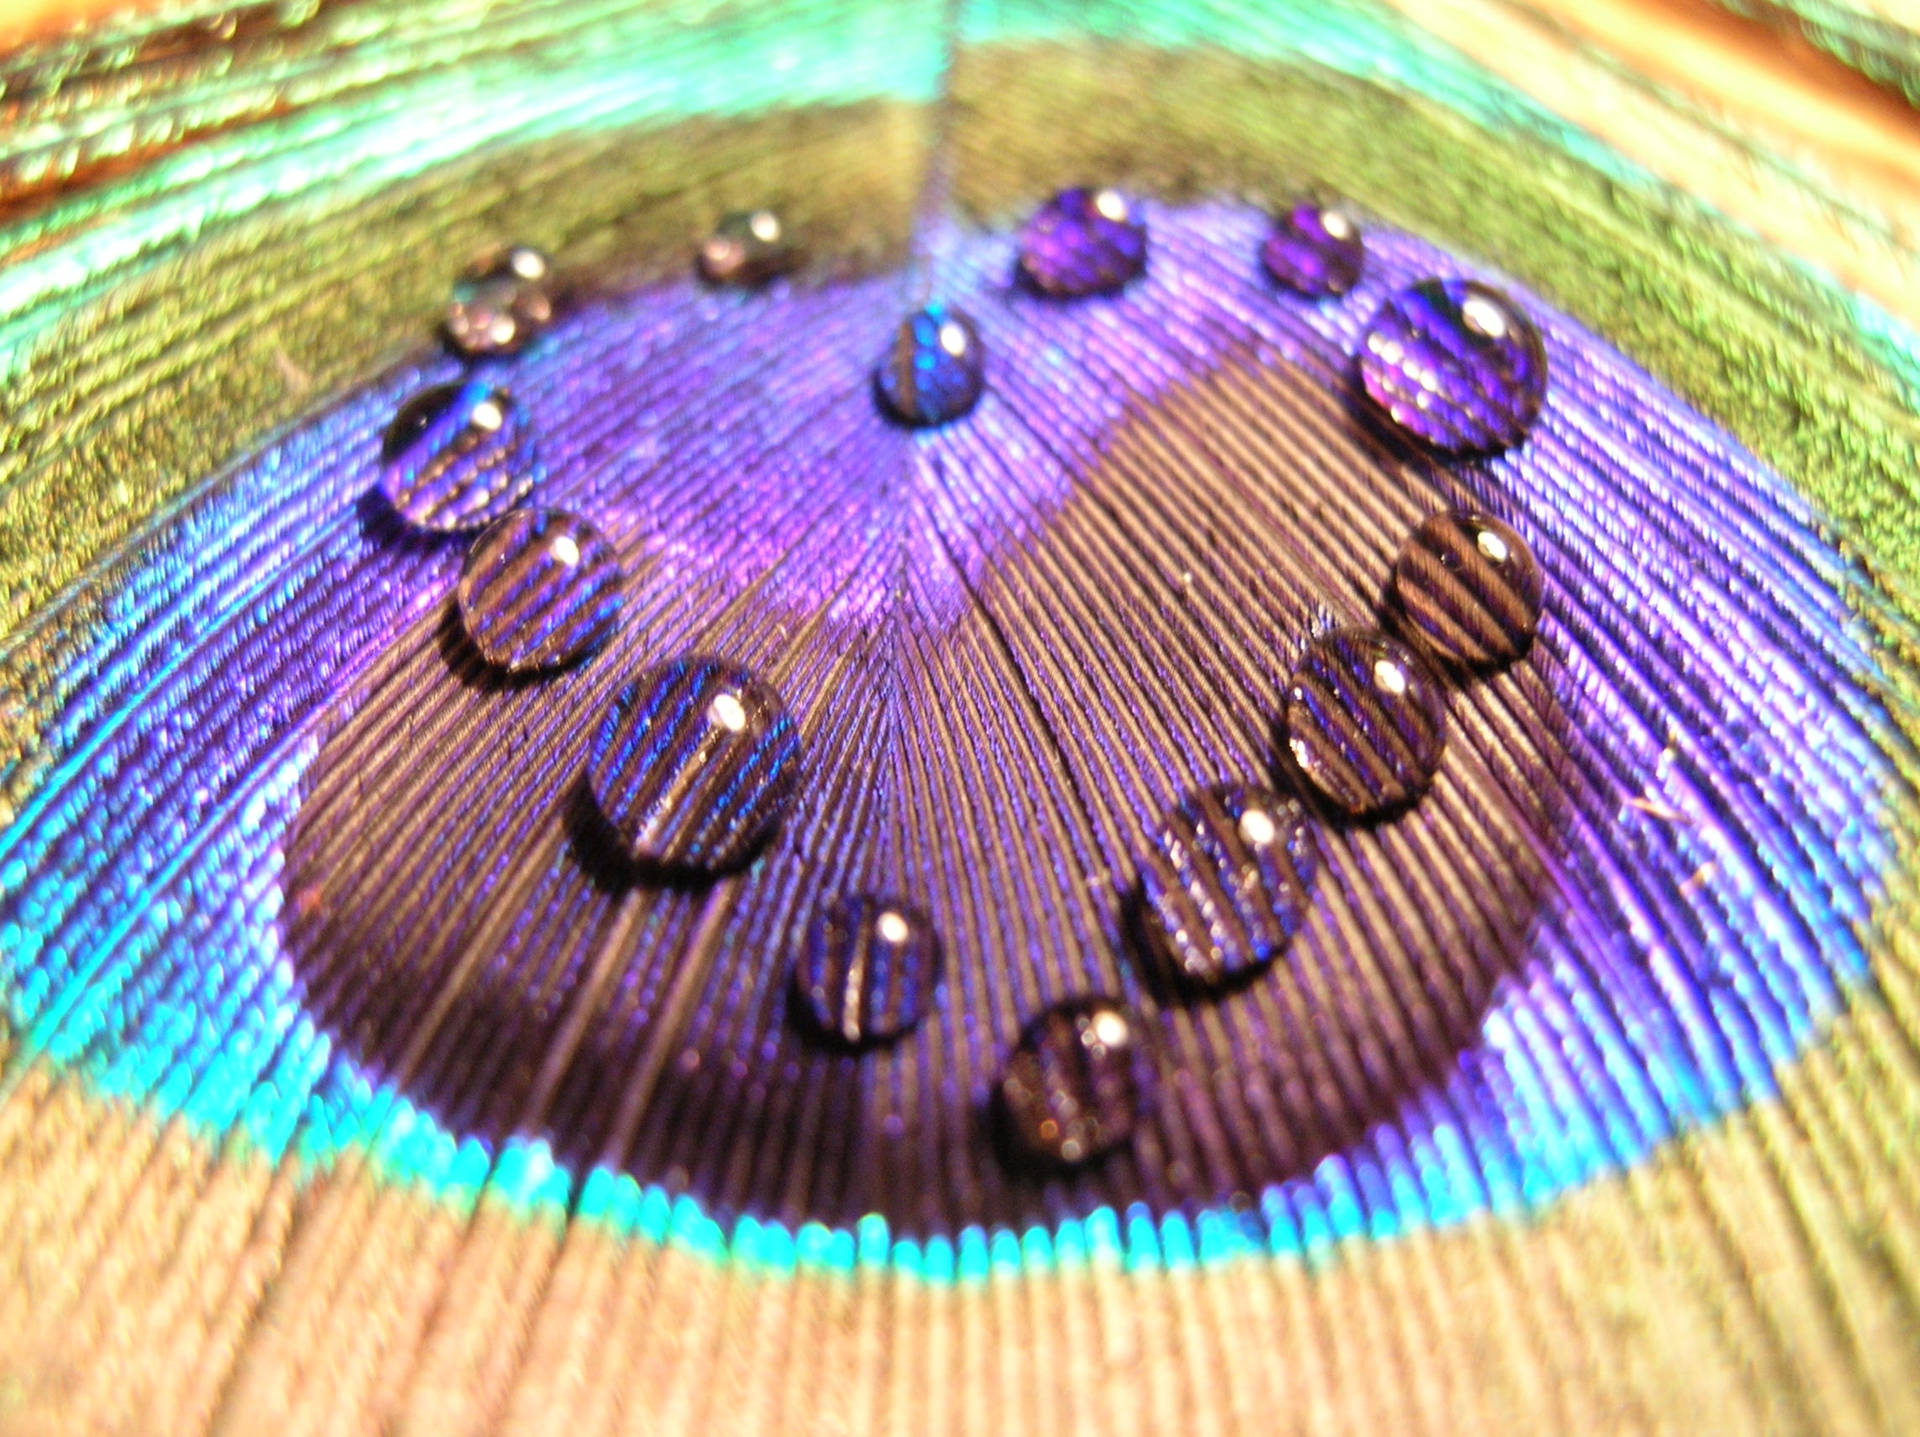 Microscopic Heart Droplets On Peacock Feather Wallpaper